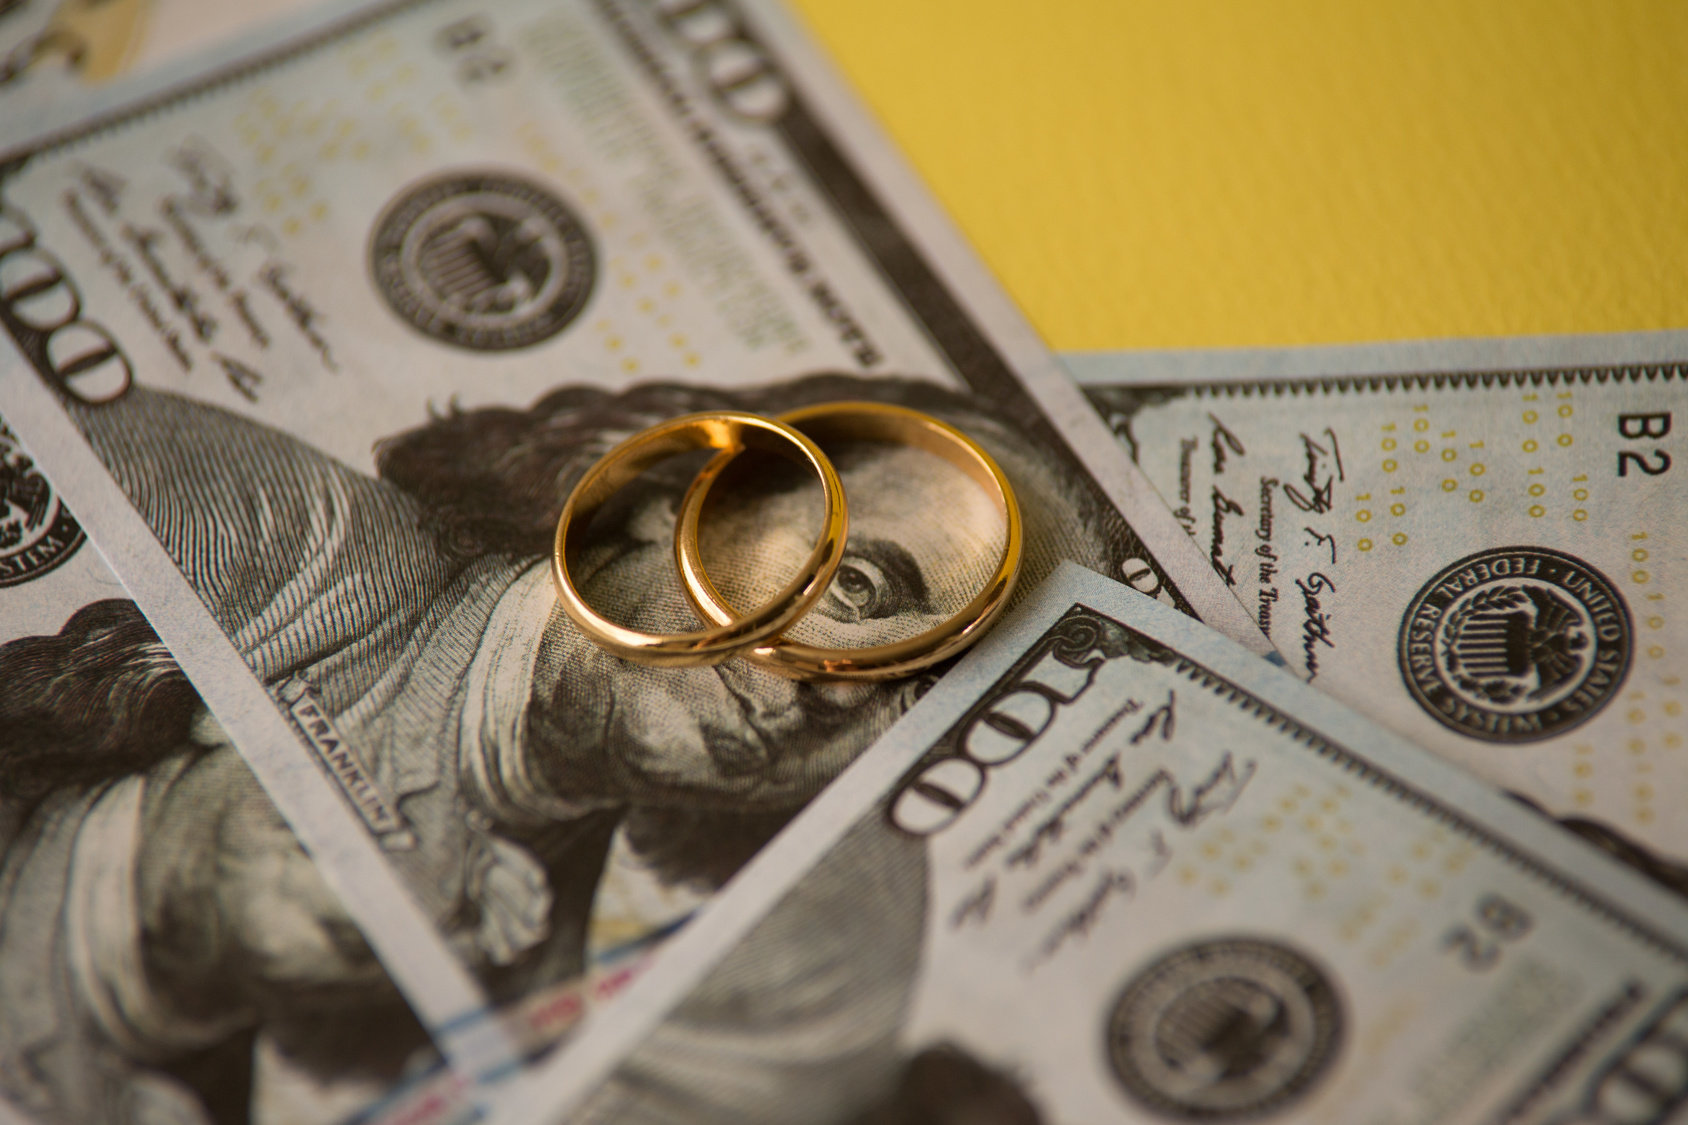 About I Want To Divorce My Husband But I Have No Money